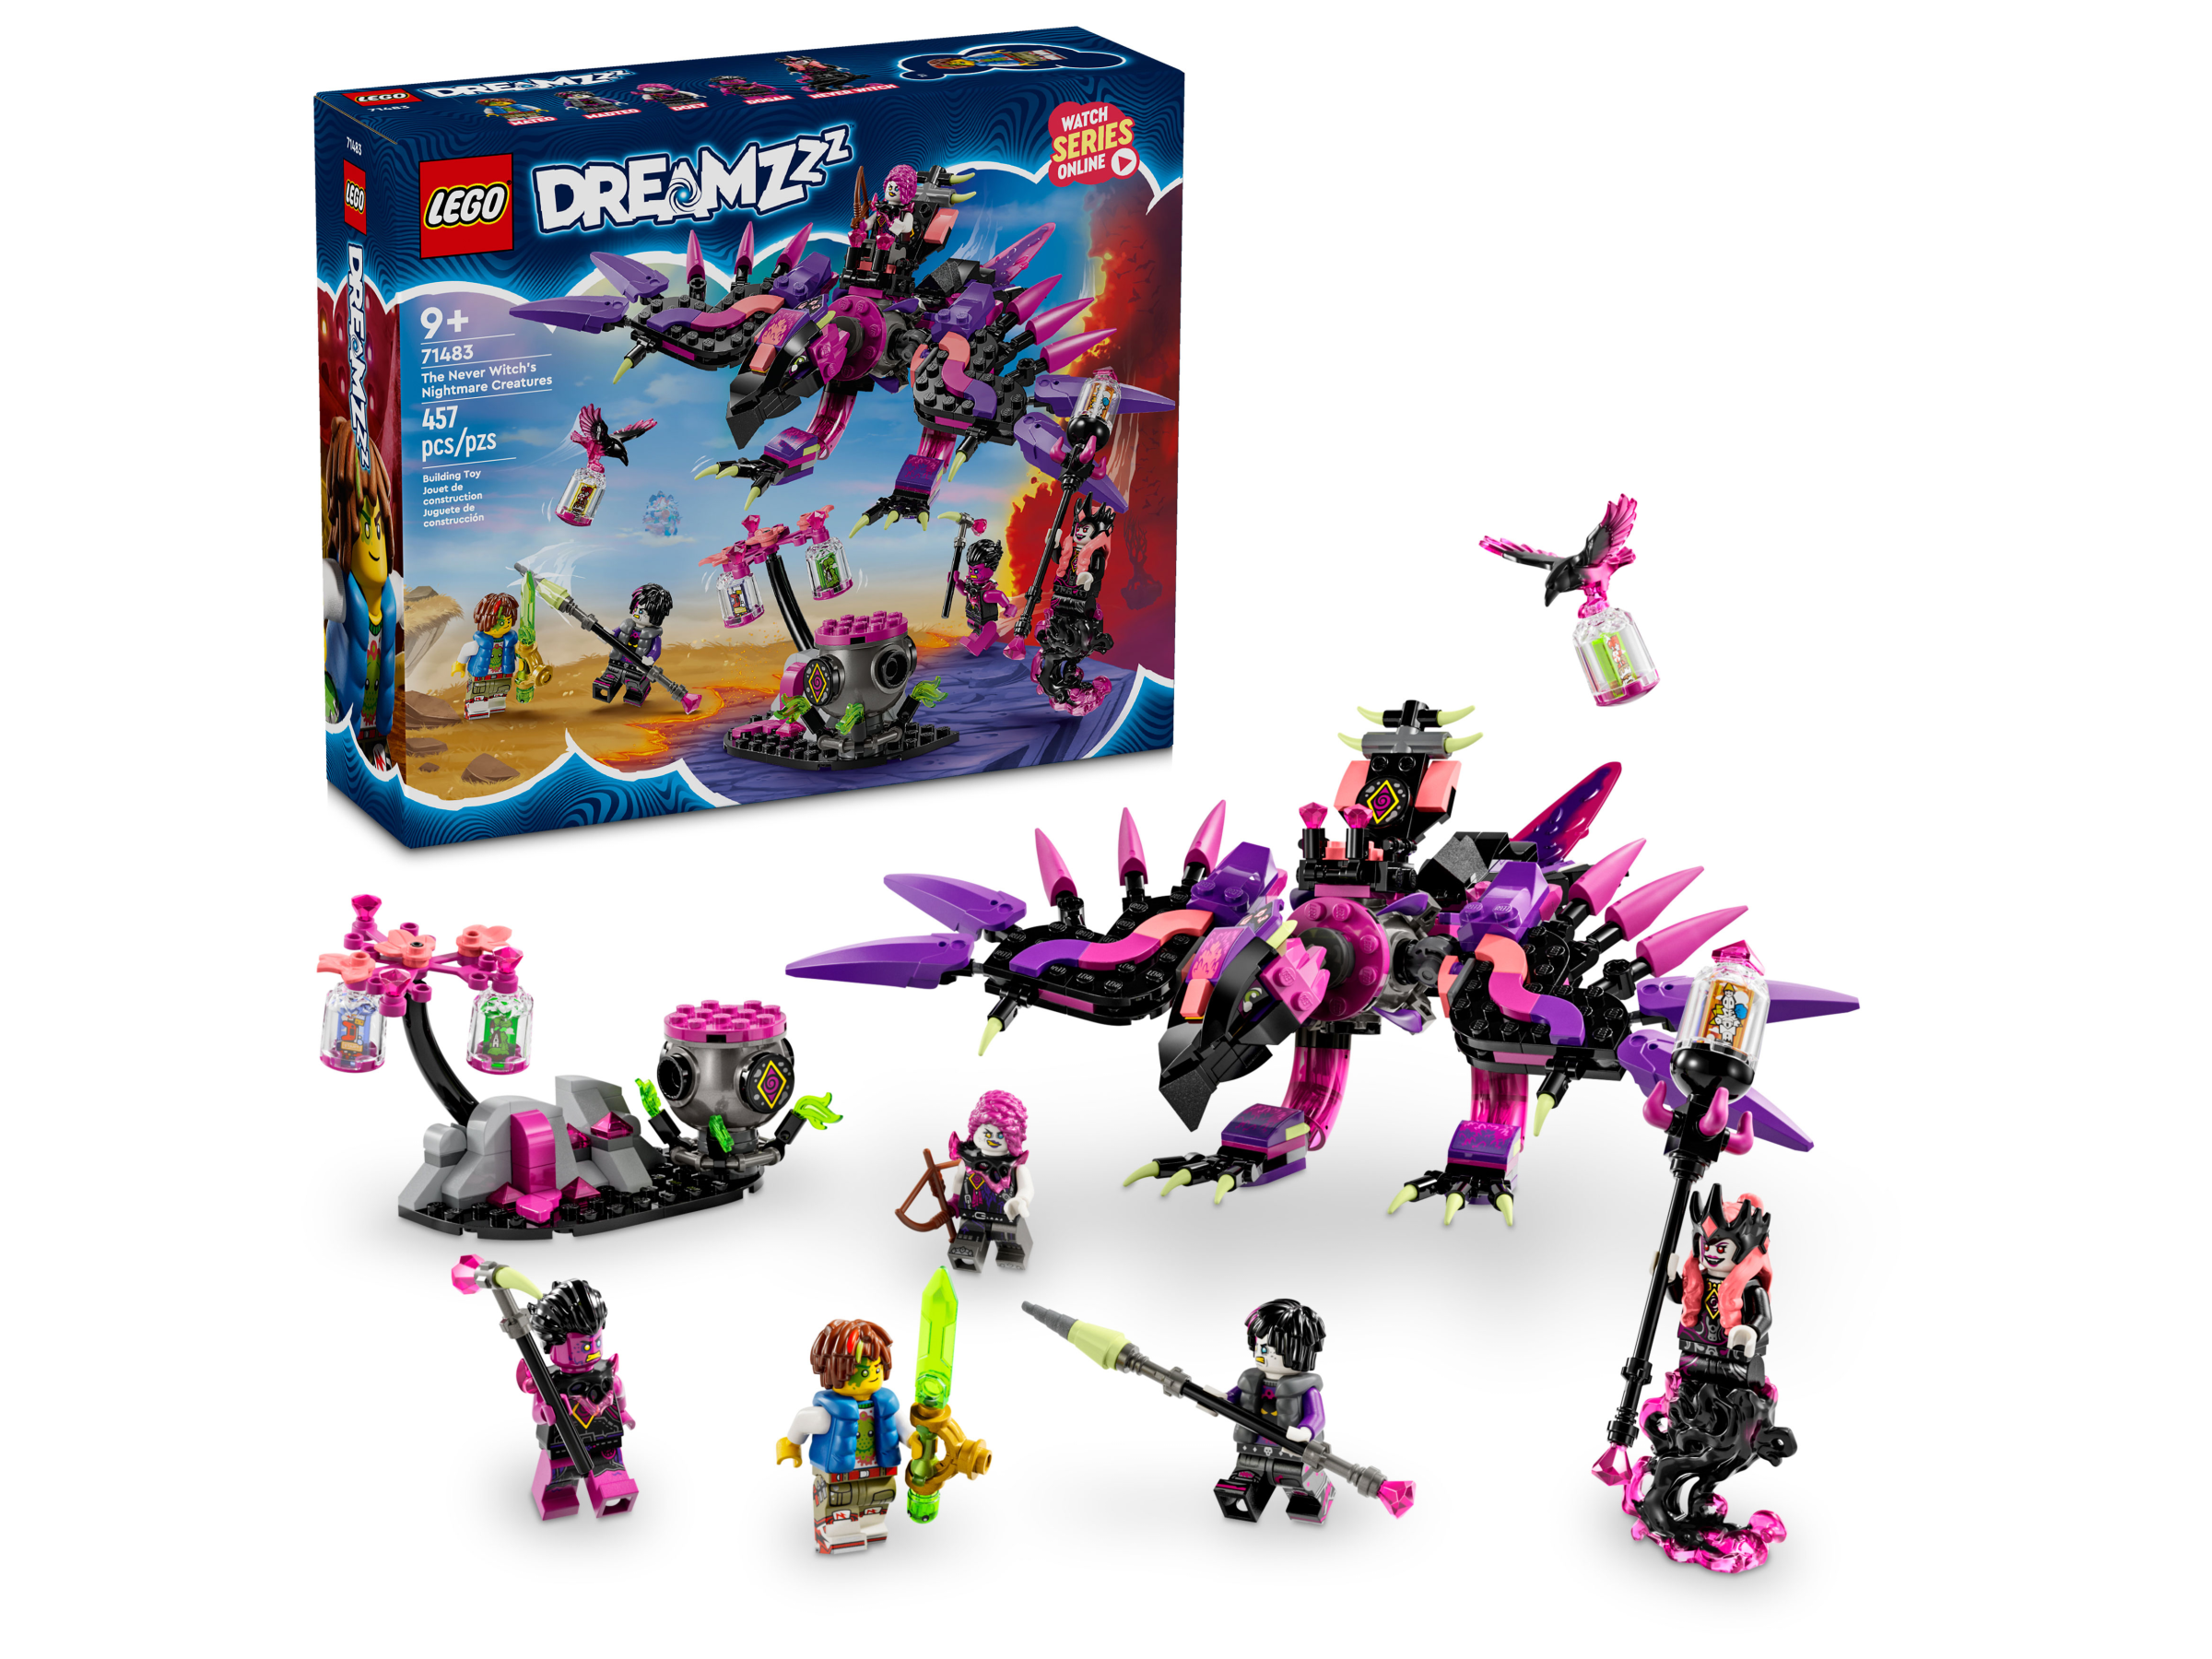 The Never Witch's Nightmare Creatures 71483 | LEGO® DREAMZzz 